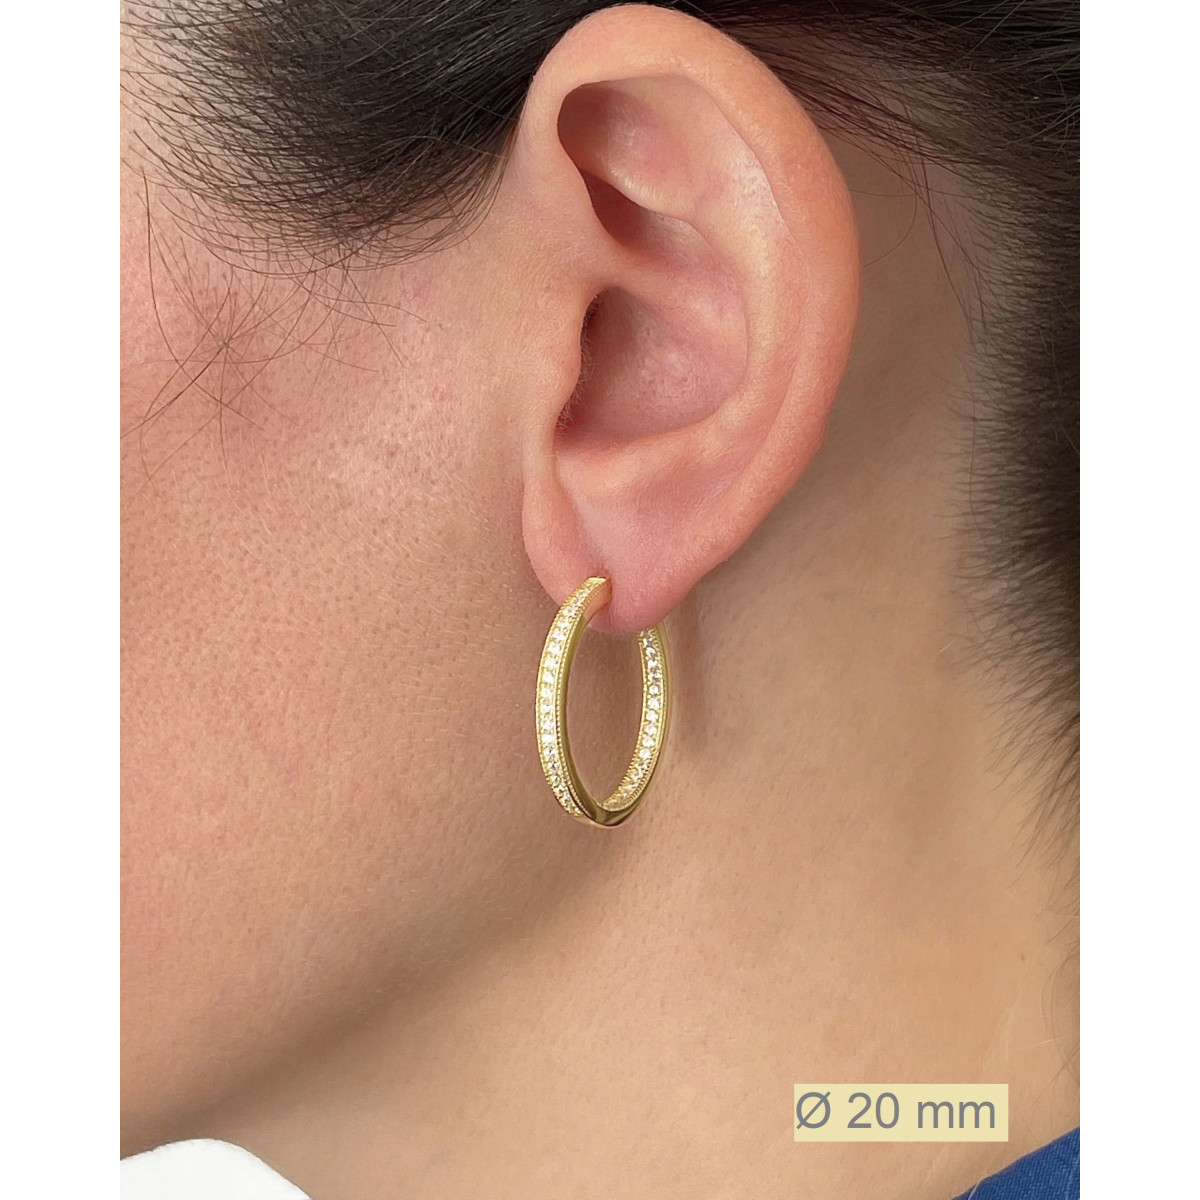 SMALL HOOP EARRINGS WITH WHITE PROFILE